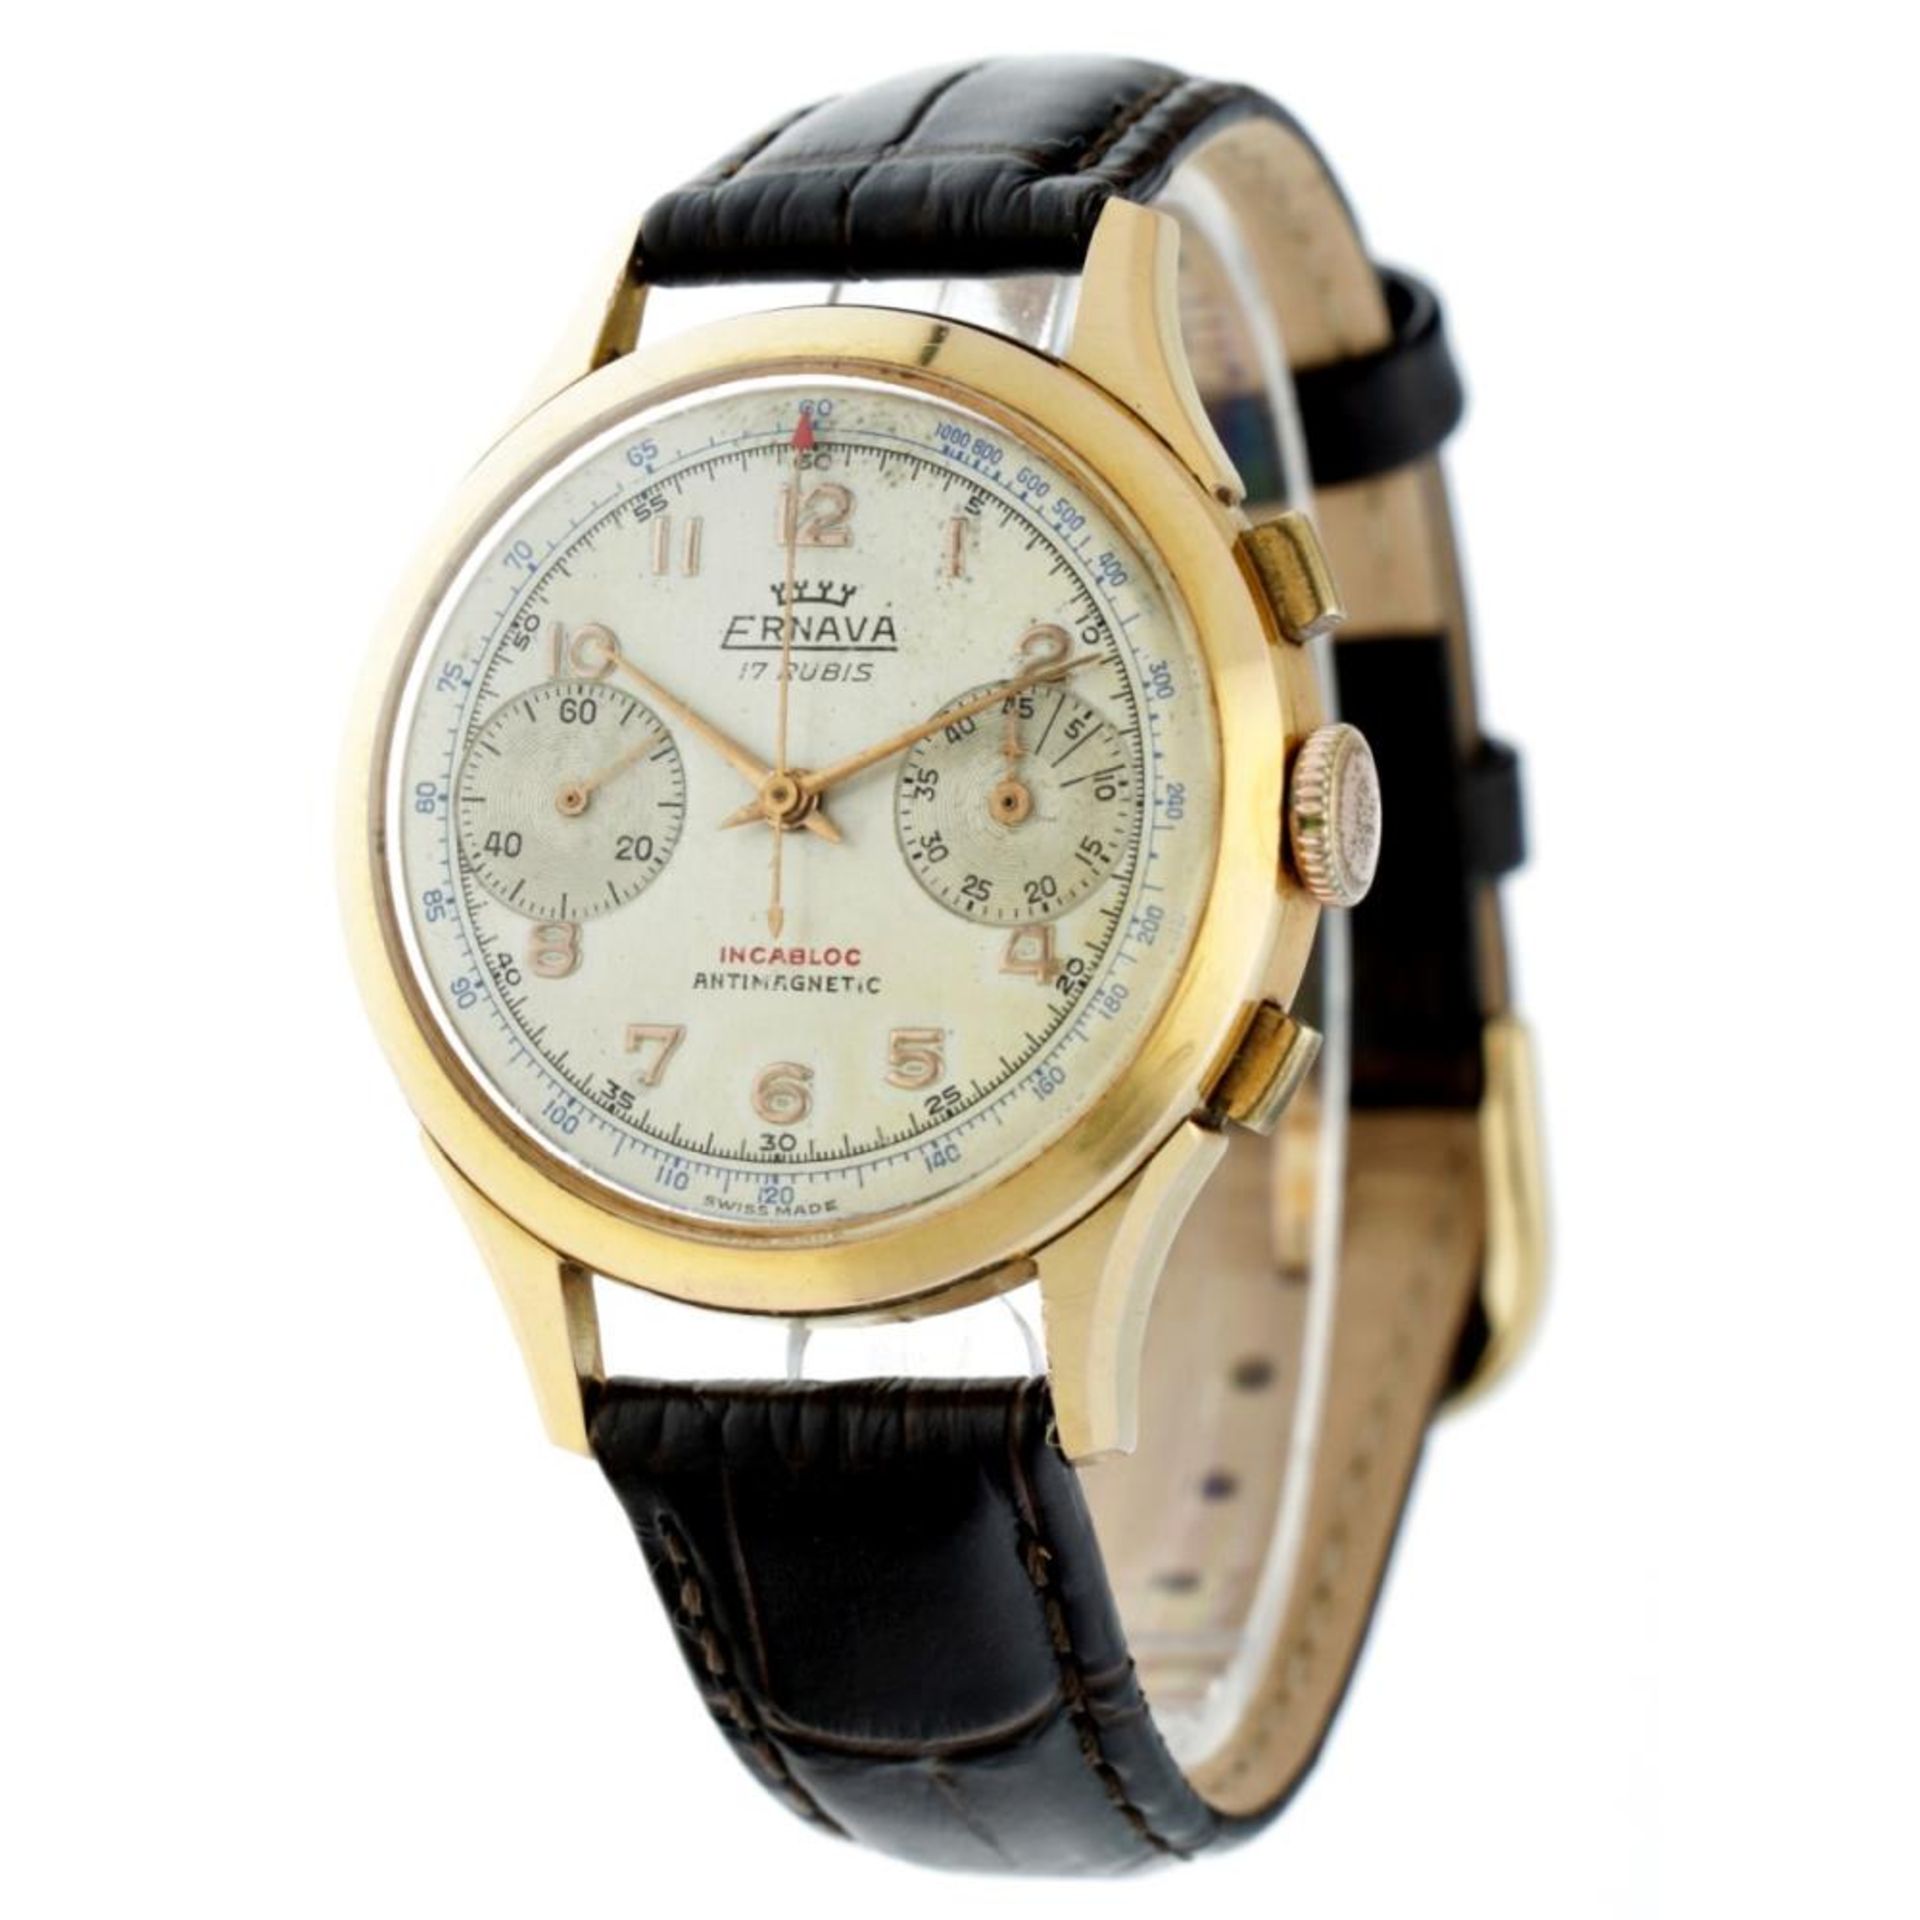 Ervana Chronograph 22083 - Men's watch - approx. 1950. - Image 4 of 12